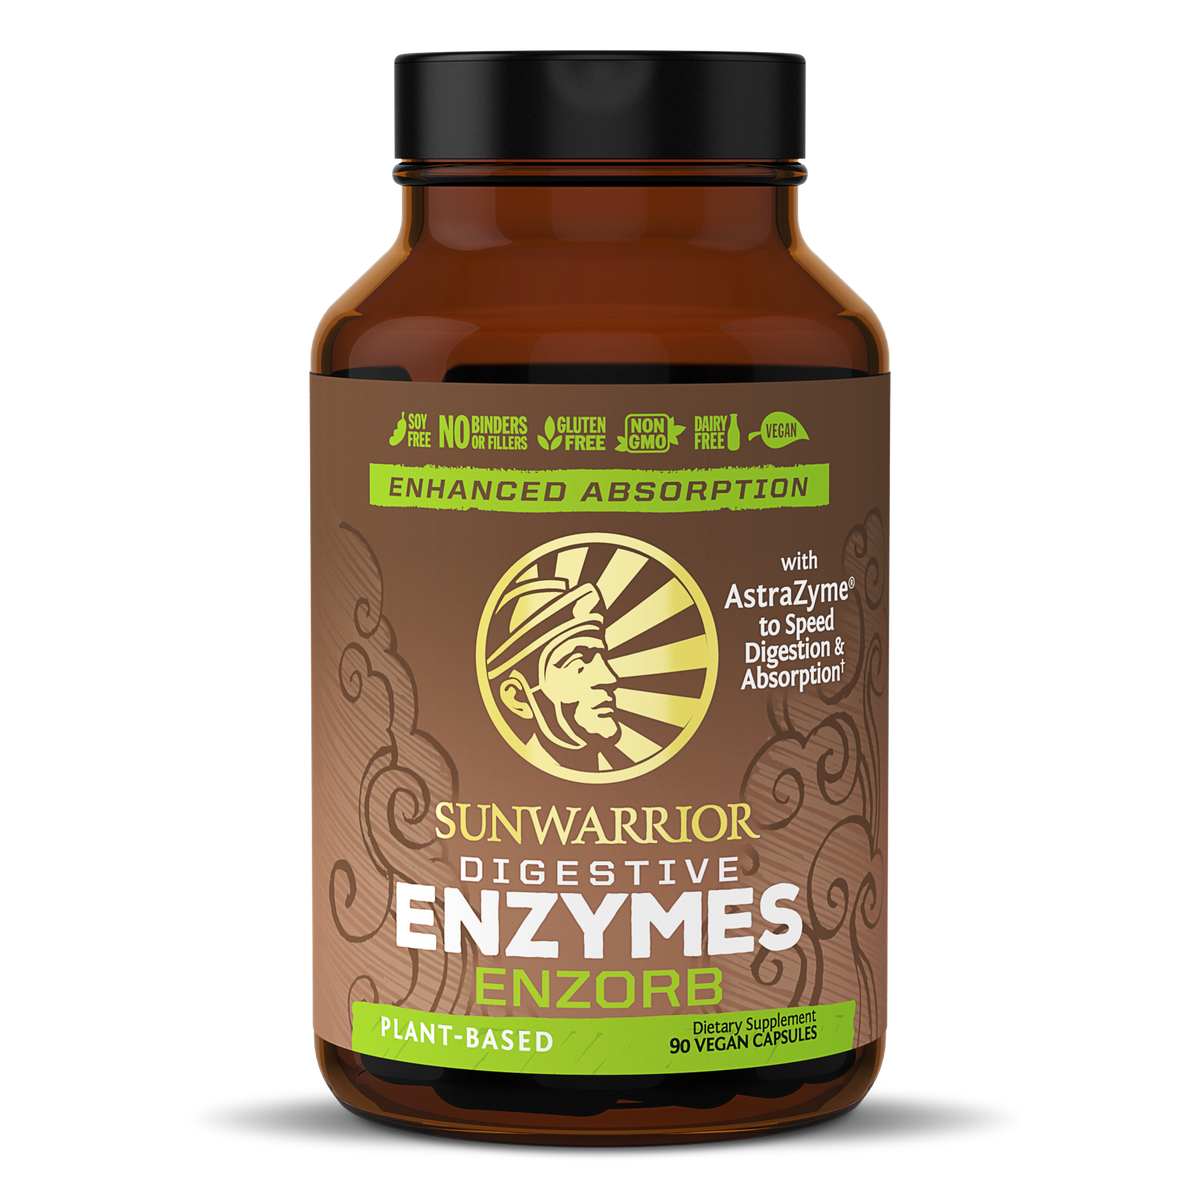 Digestive Enzyms Capsules (90 Caps)